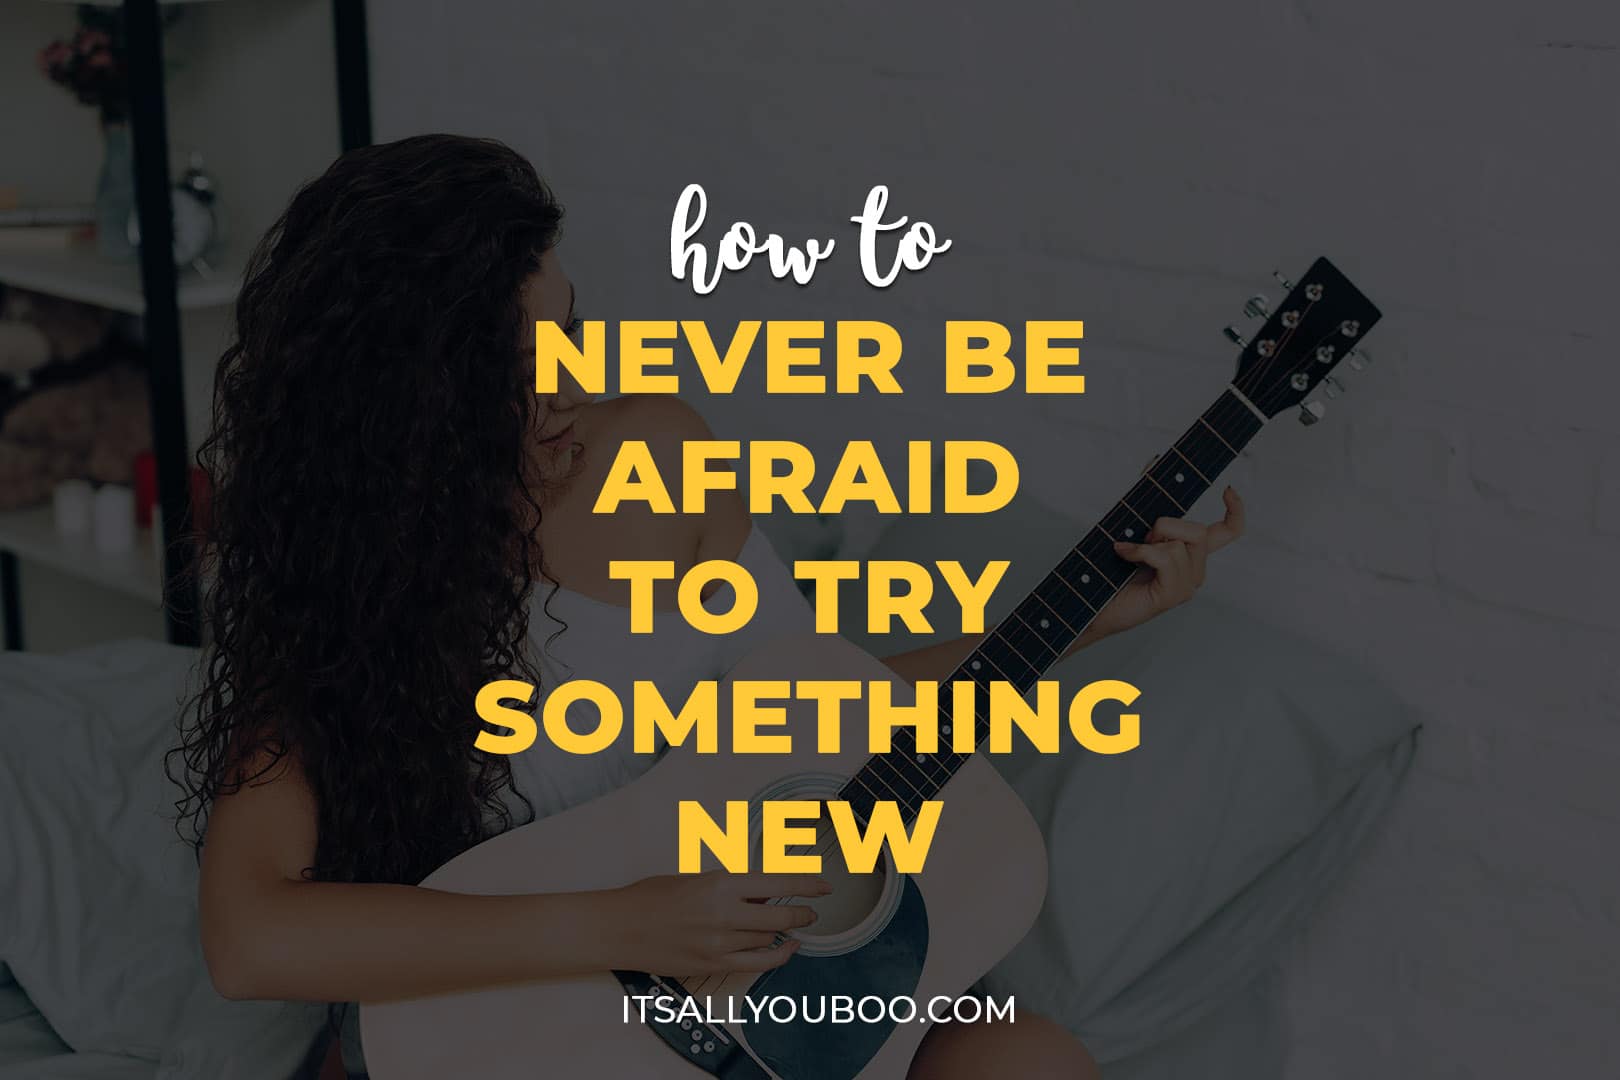 How To Never Be Afraid to Try Something New